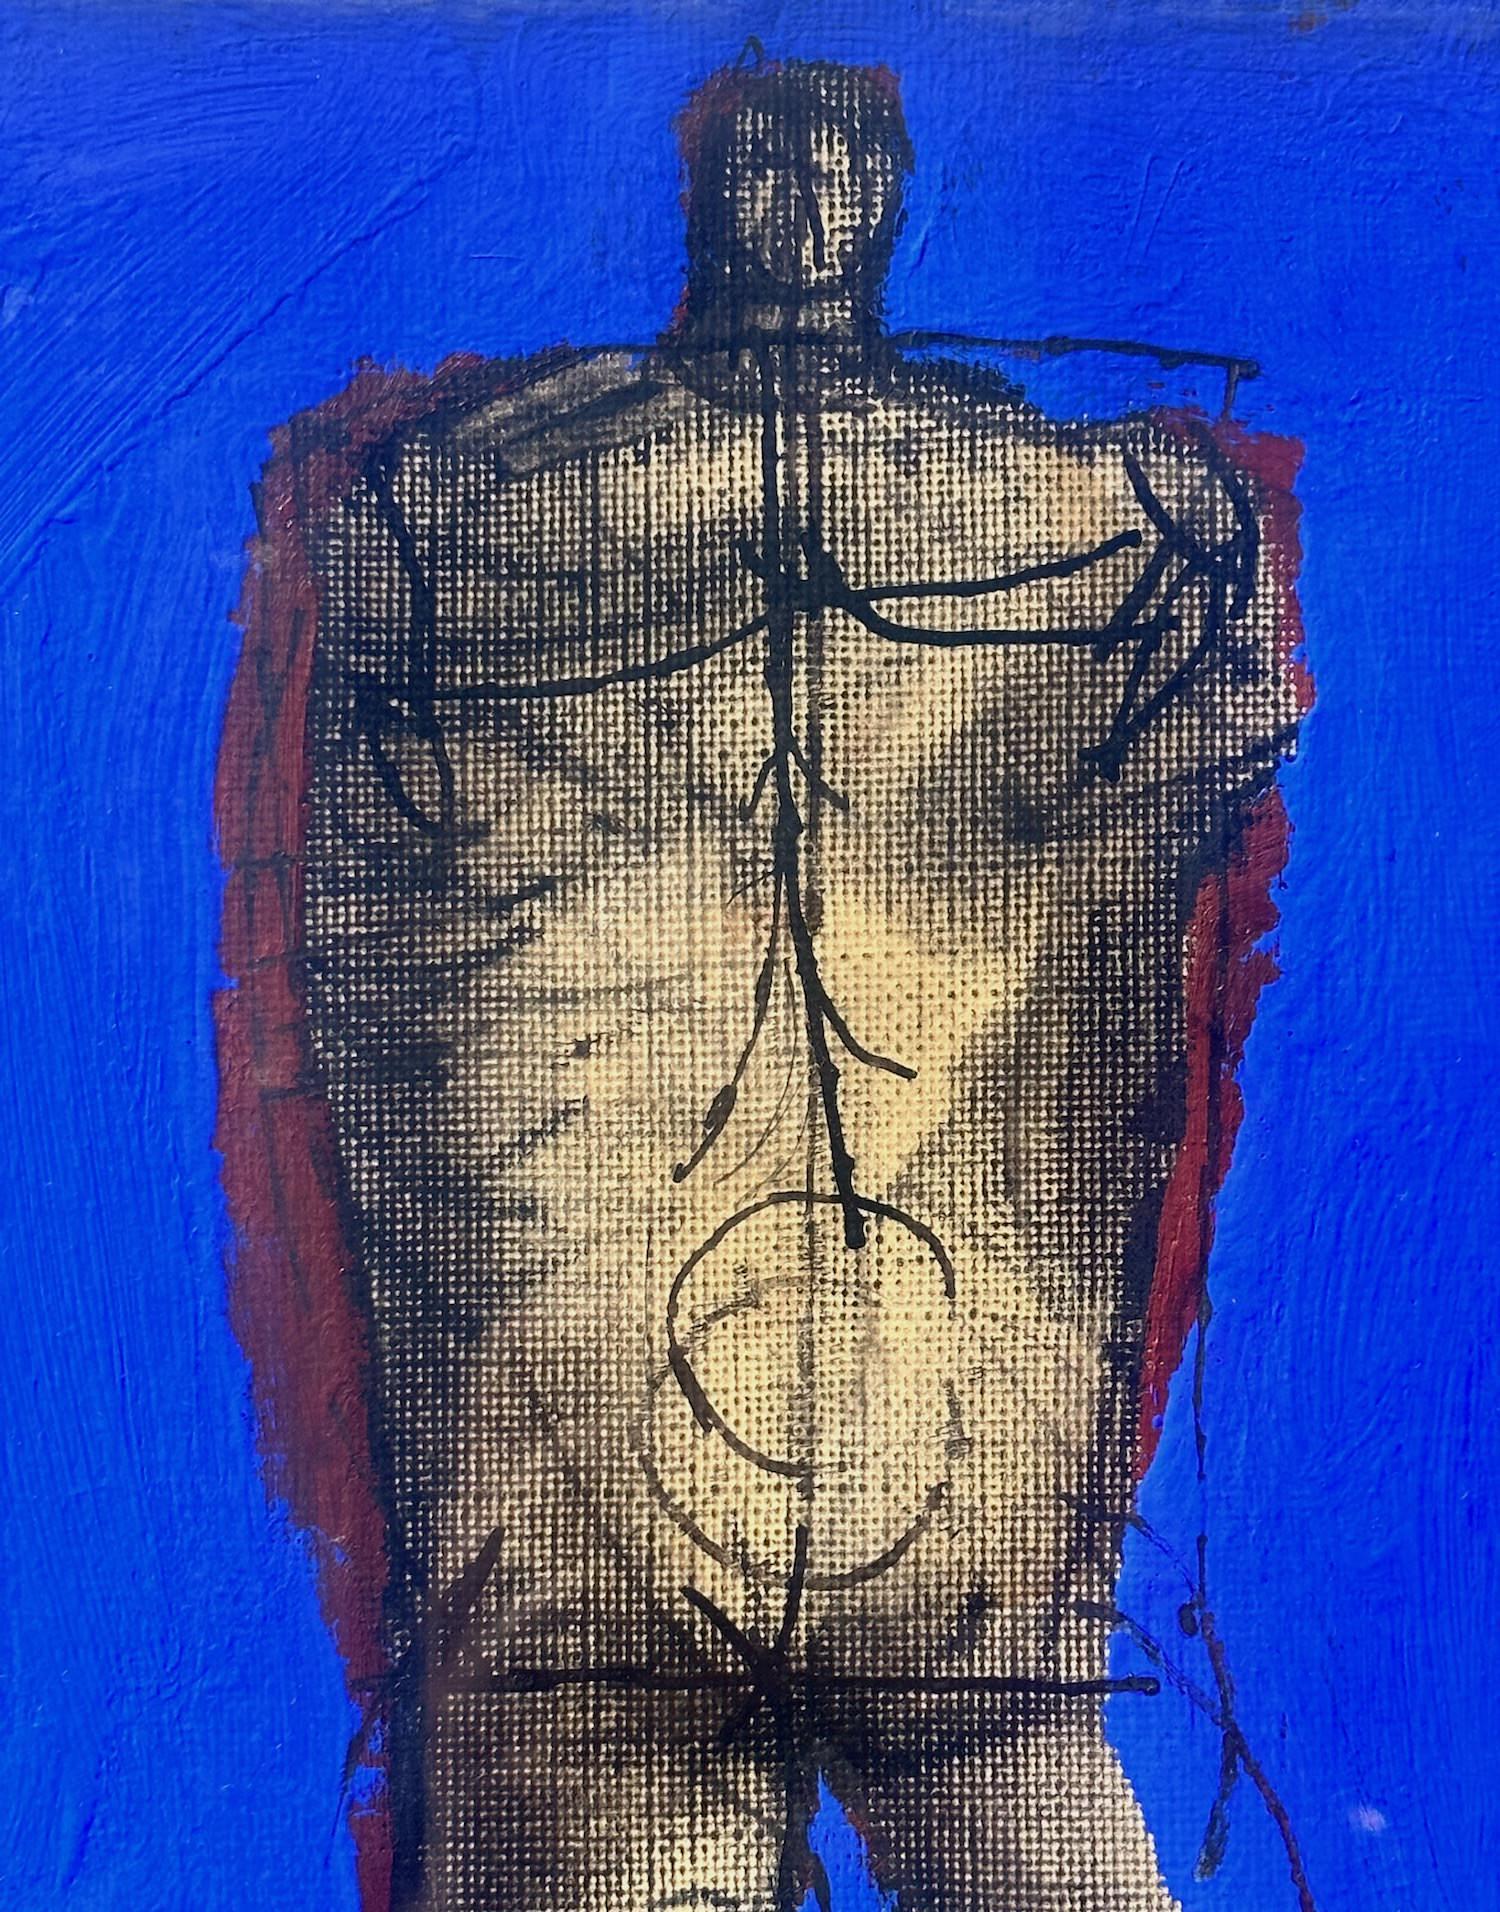 Joseph Glasco (American, 1925-1996)
Standing Man, 1955
India ink and gouache on textured paper
10 x 8 inches
16.75 x 13.5 inches, framed

Joseph Glasco was born in Paul’s Valley, Oklahoma and grew up in Texas. In 1949, after his first one-person